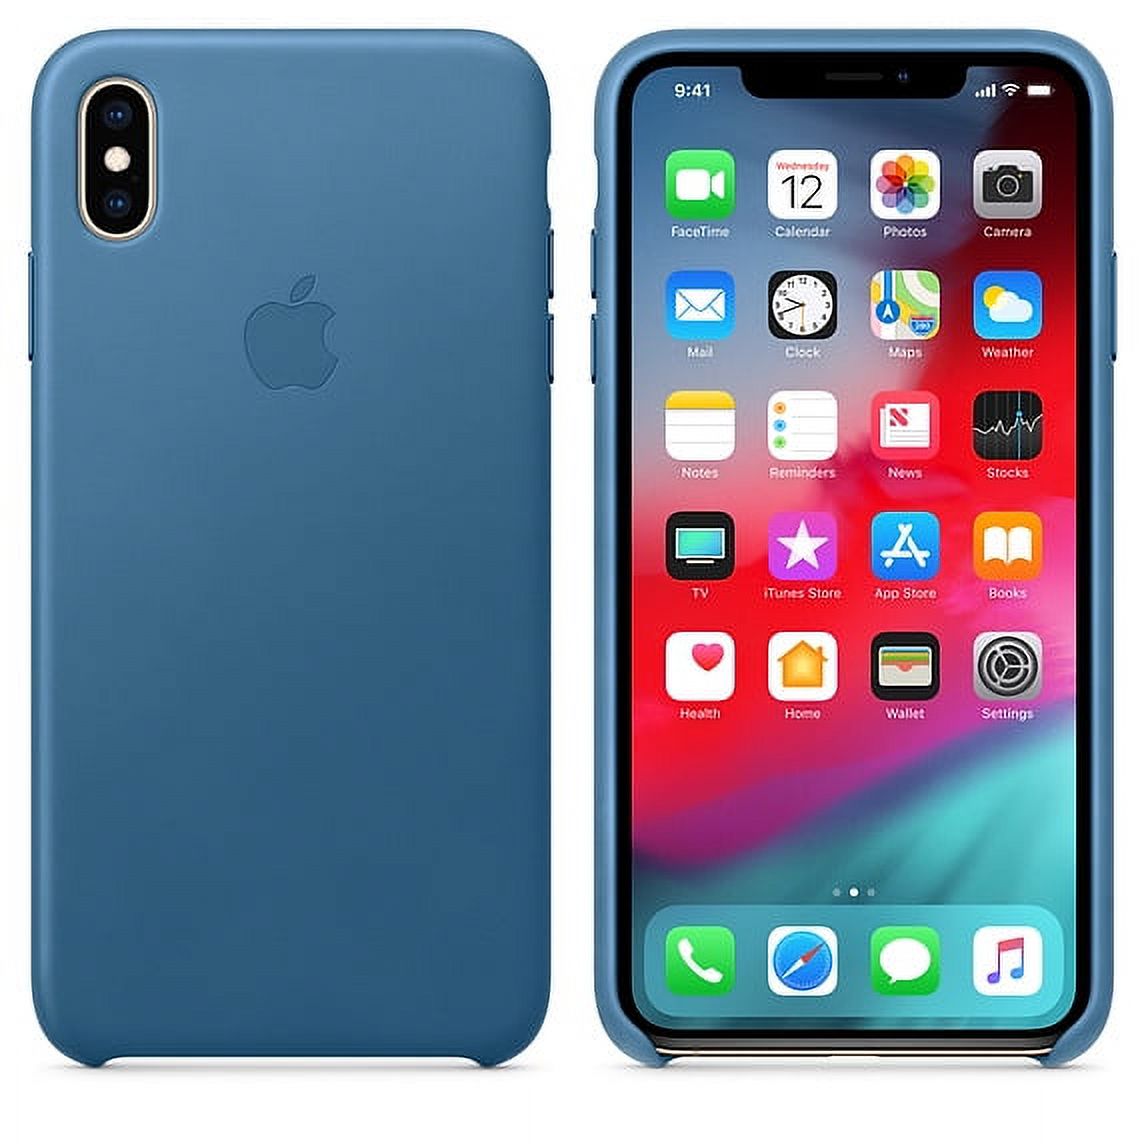 Apple Leather Case for iPhone XS Max - Cape Cod Blue - image 3 of 3